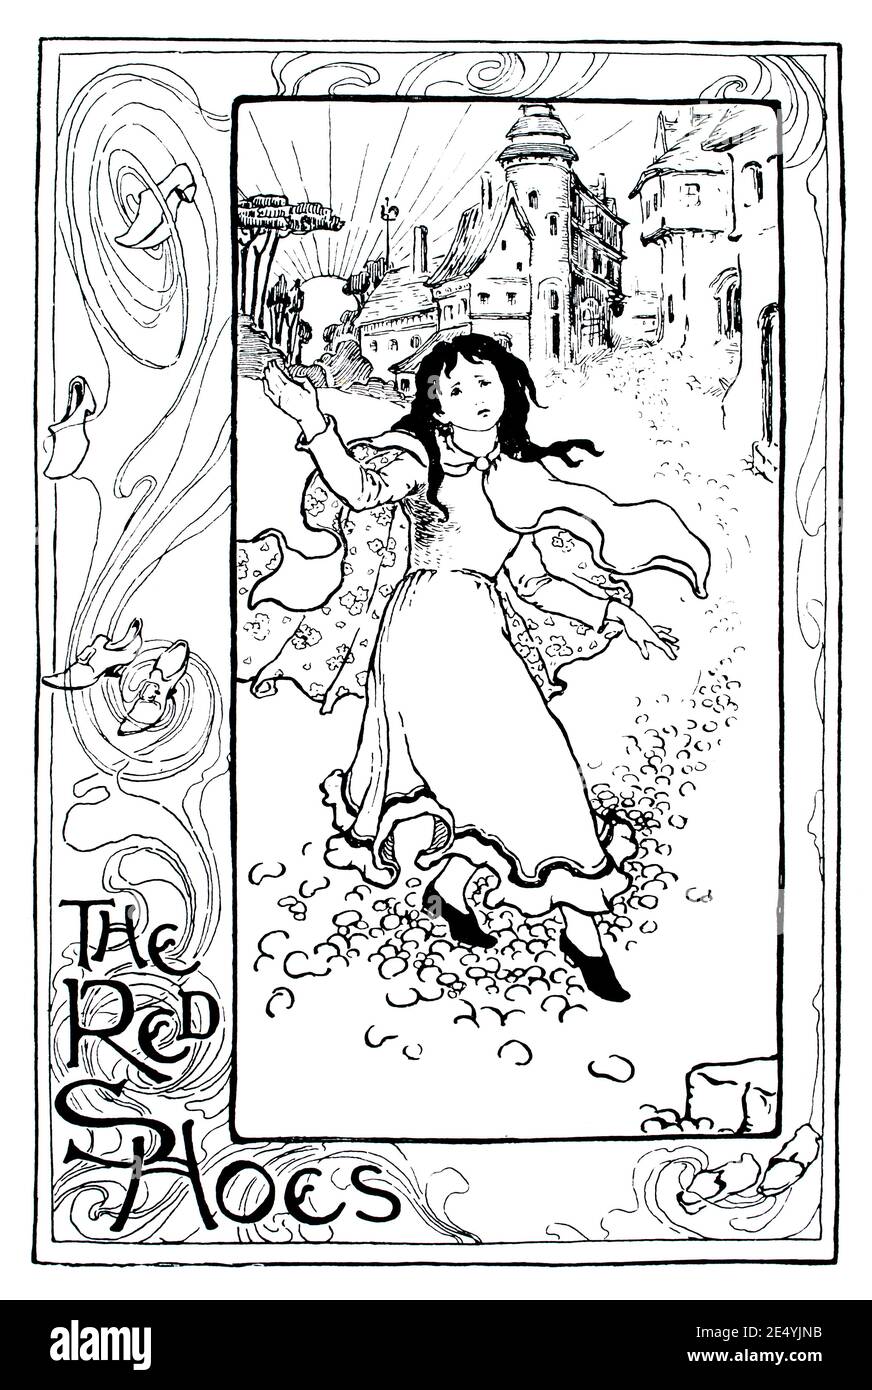 The Red Shoes, Fairy Tale Illustration von Emily Ann Attwell, Mutter von Mabel Lucie Attwell 1897 das Studio an Illustrated Magazine of Fine and Appl Stockfoto